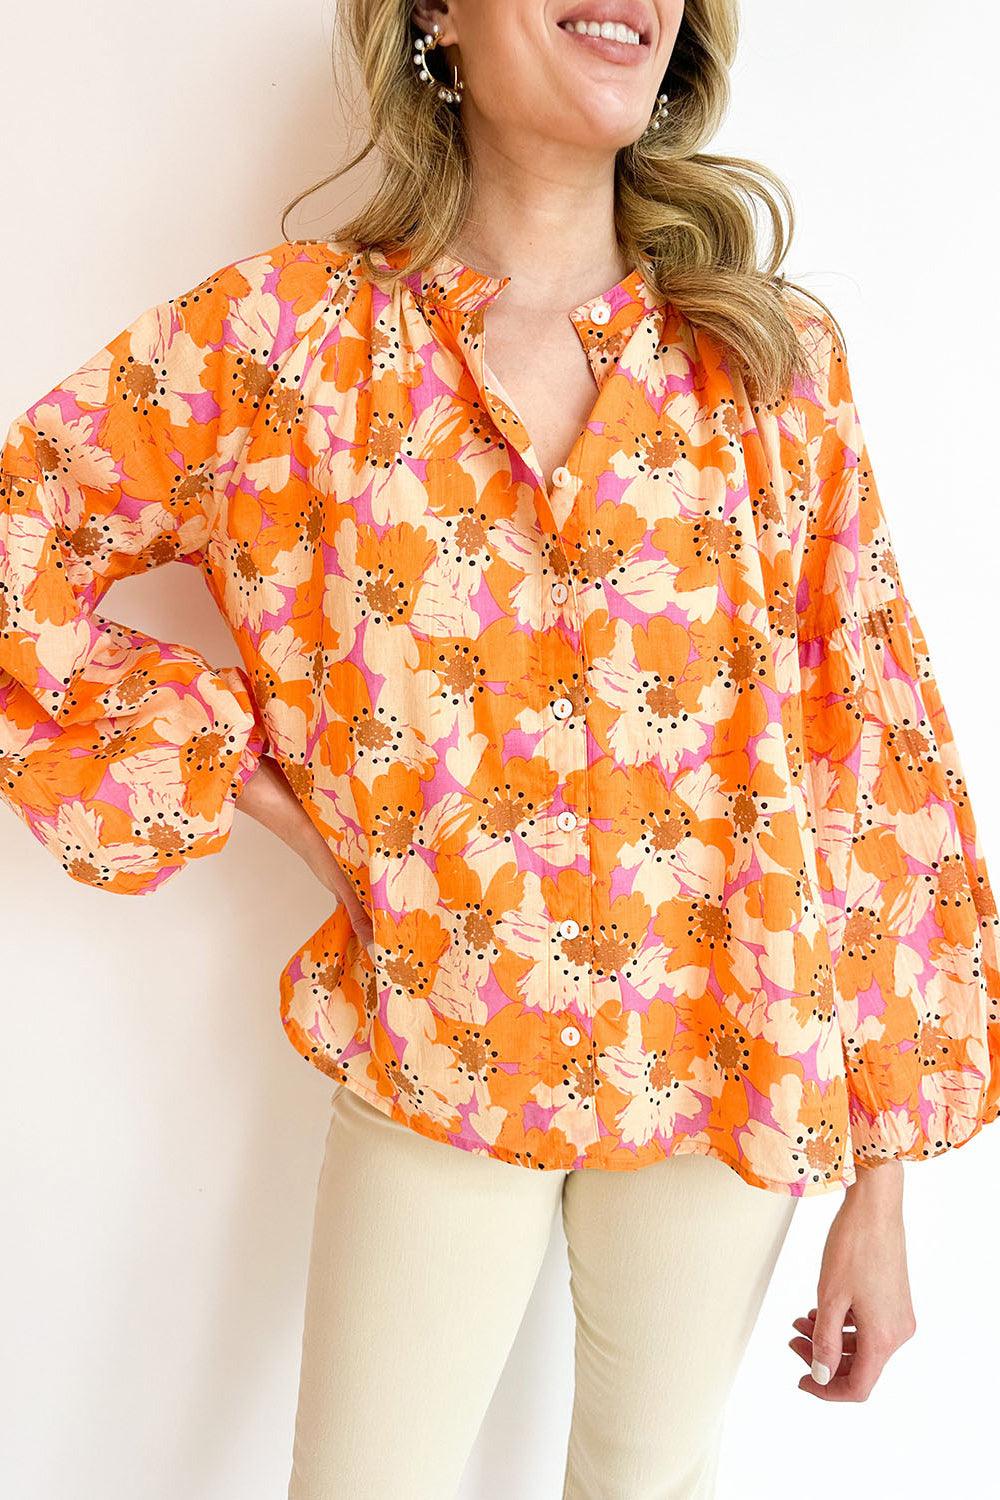 Floral Print Blouse: Embrace Your Feminine Side! Buy Now